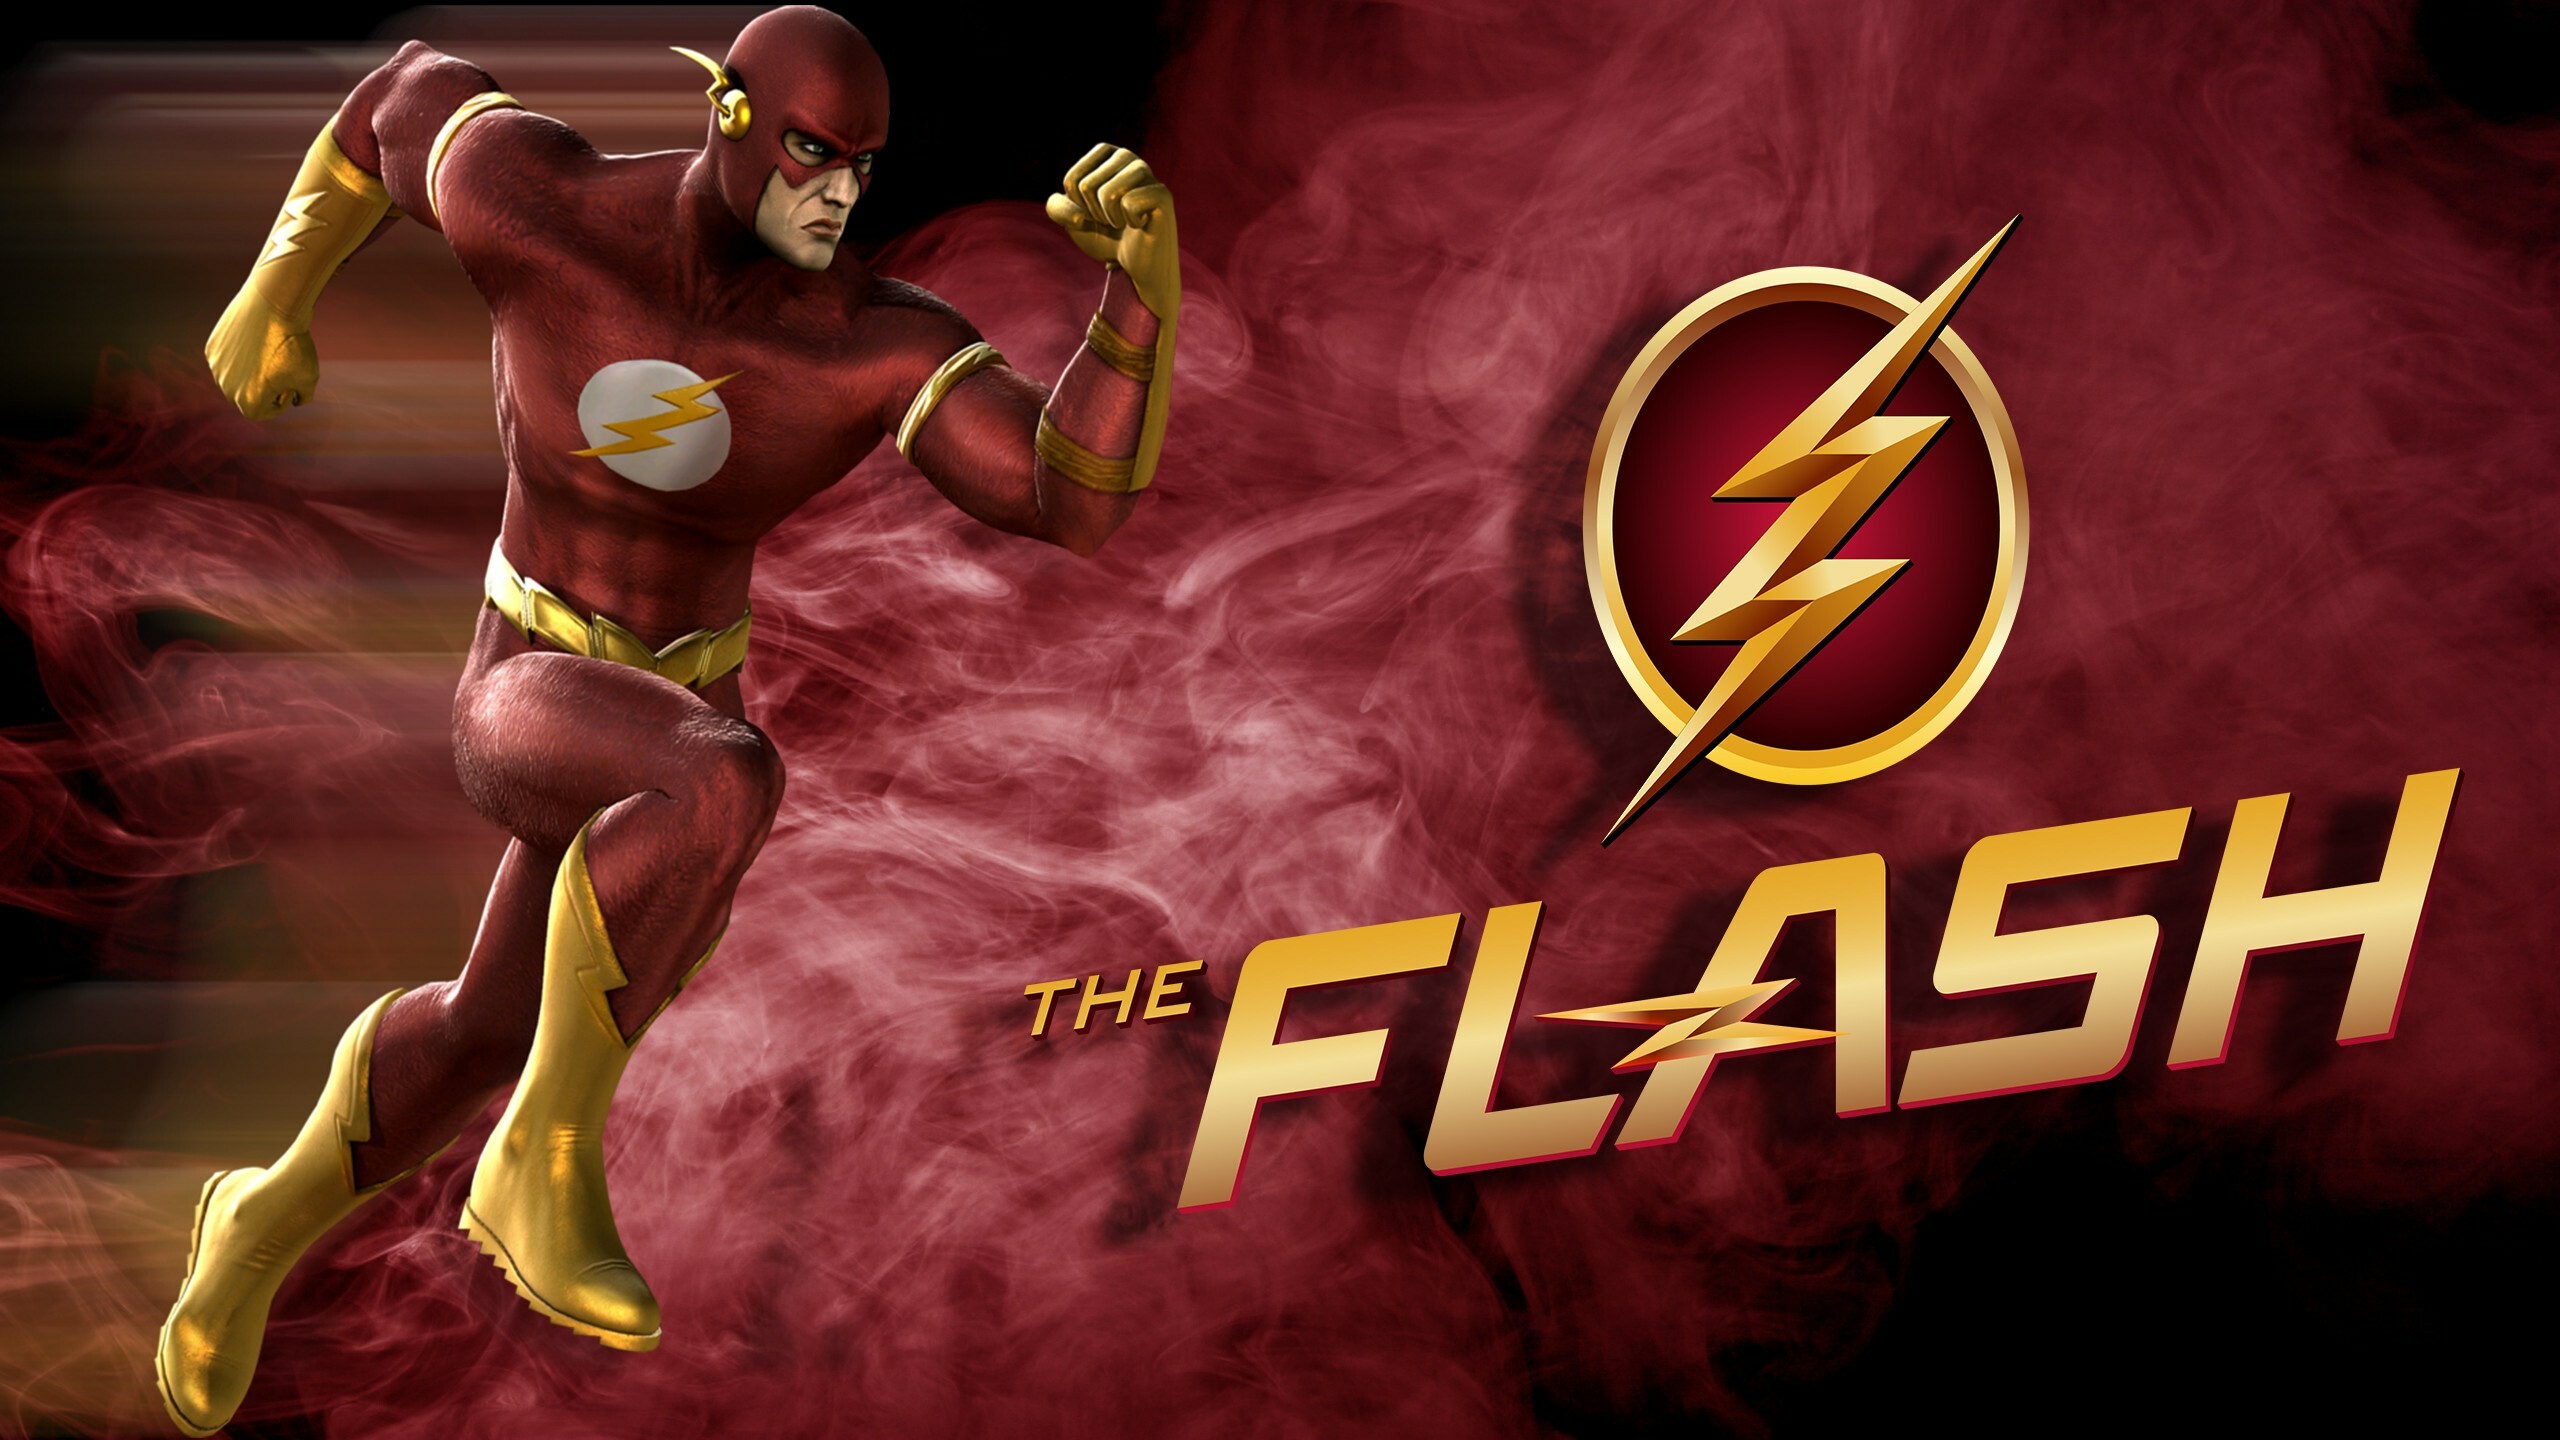 Flash (DC): Superhero, fighting crime in Central City, Super speed. 2560x1440 HD Background.